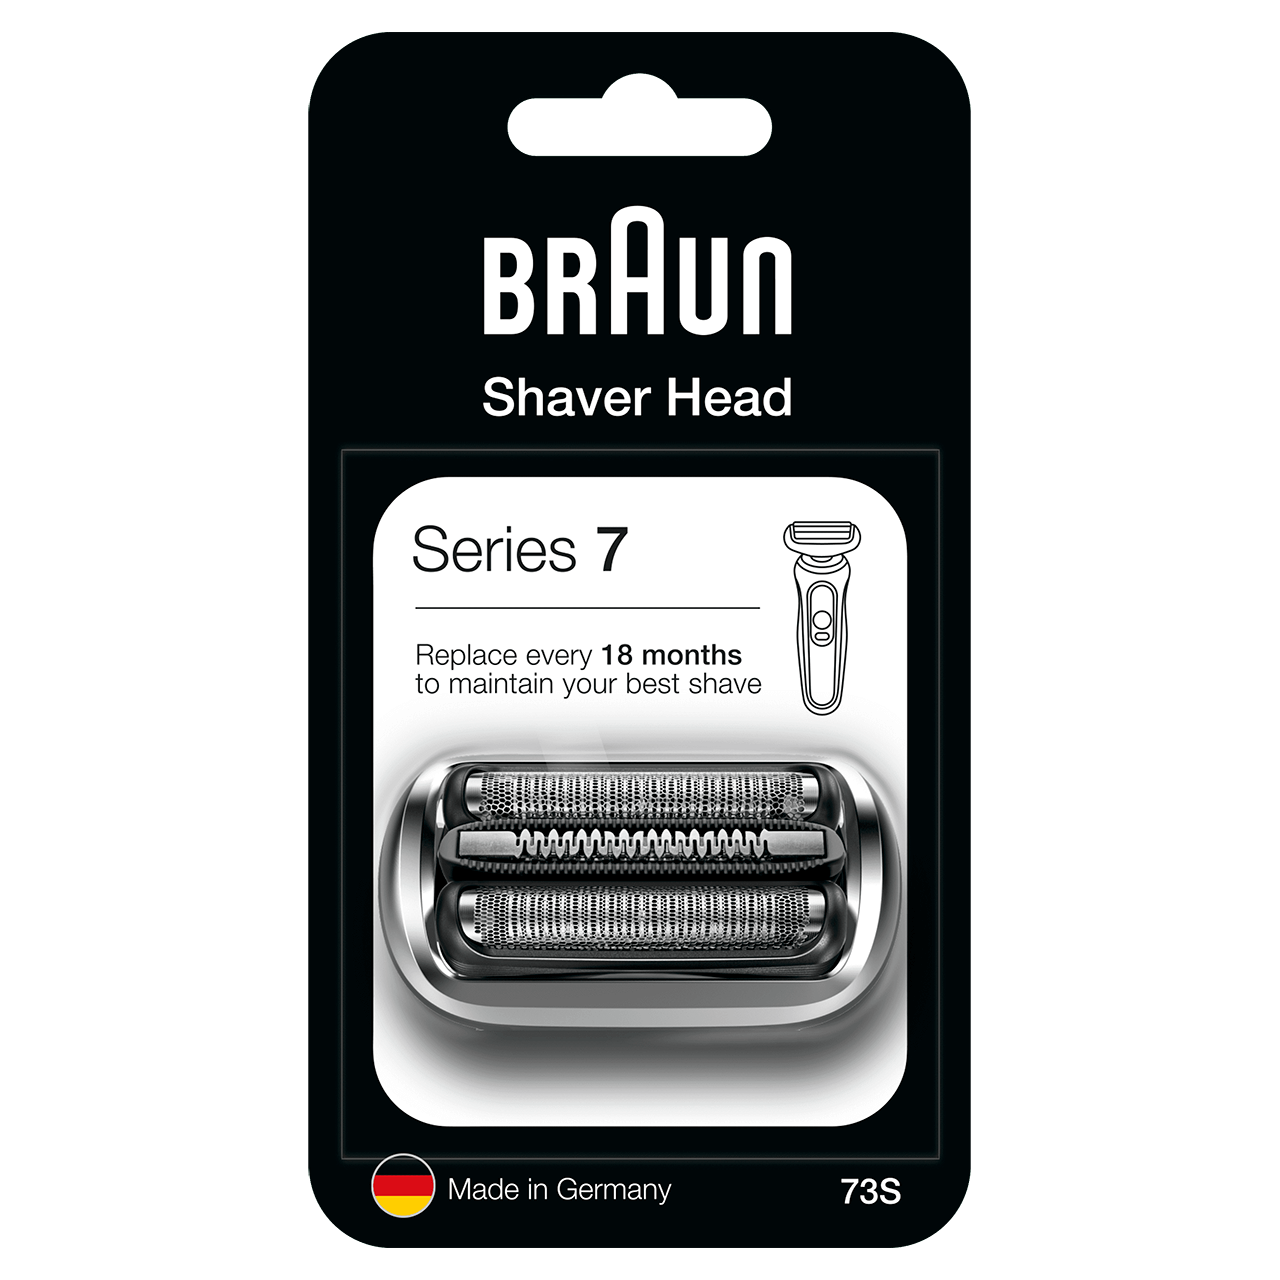 Shaver Replacement Head, Series 7, 73S (Compatilble with Series 7